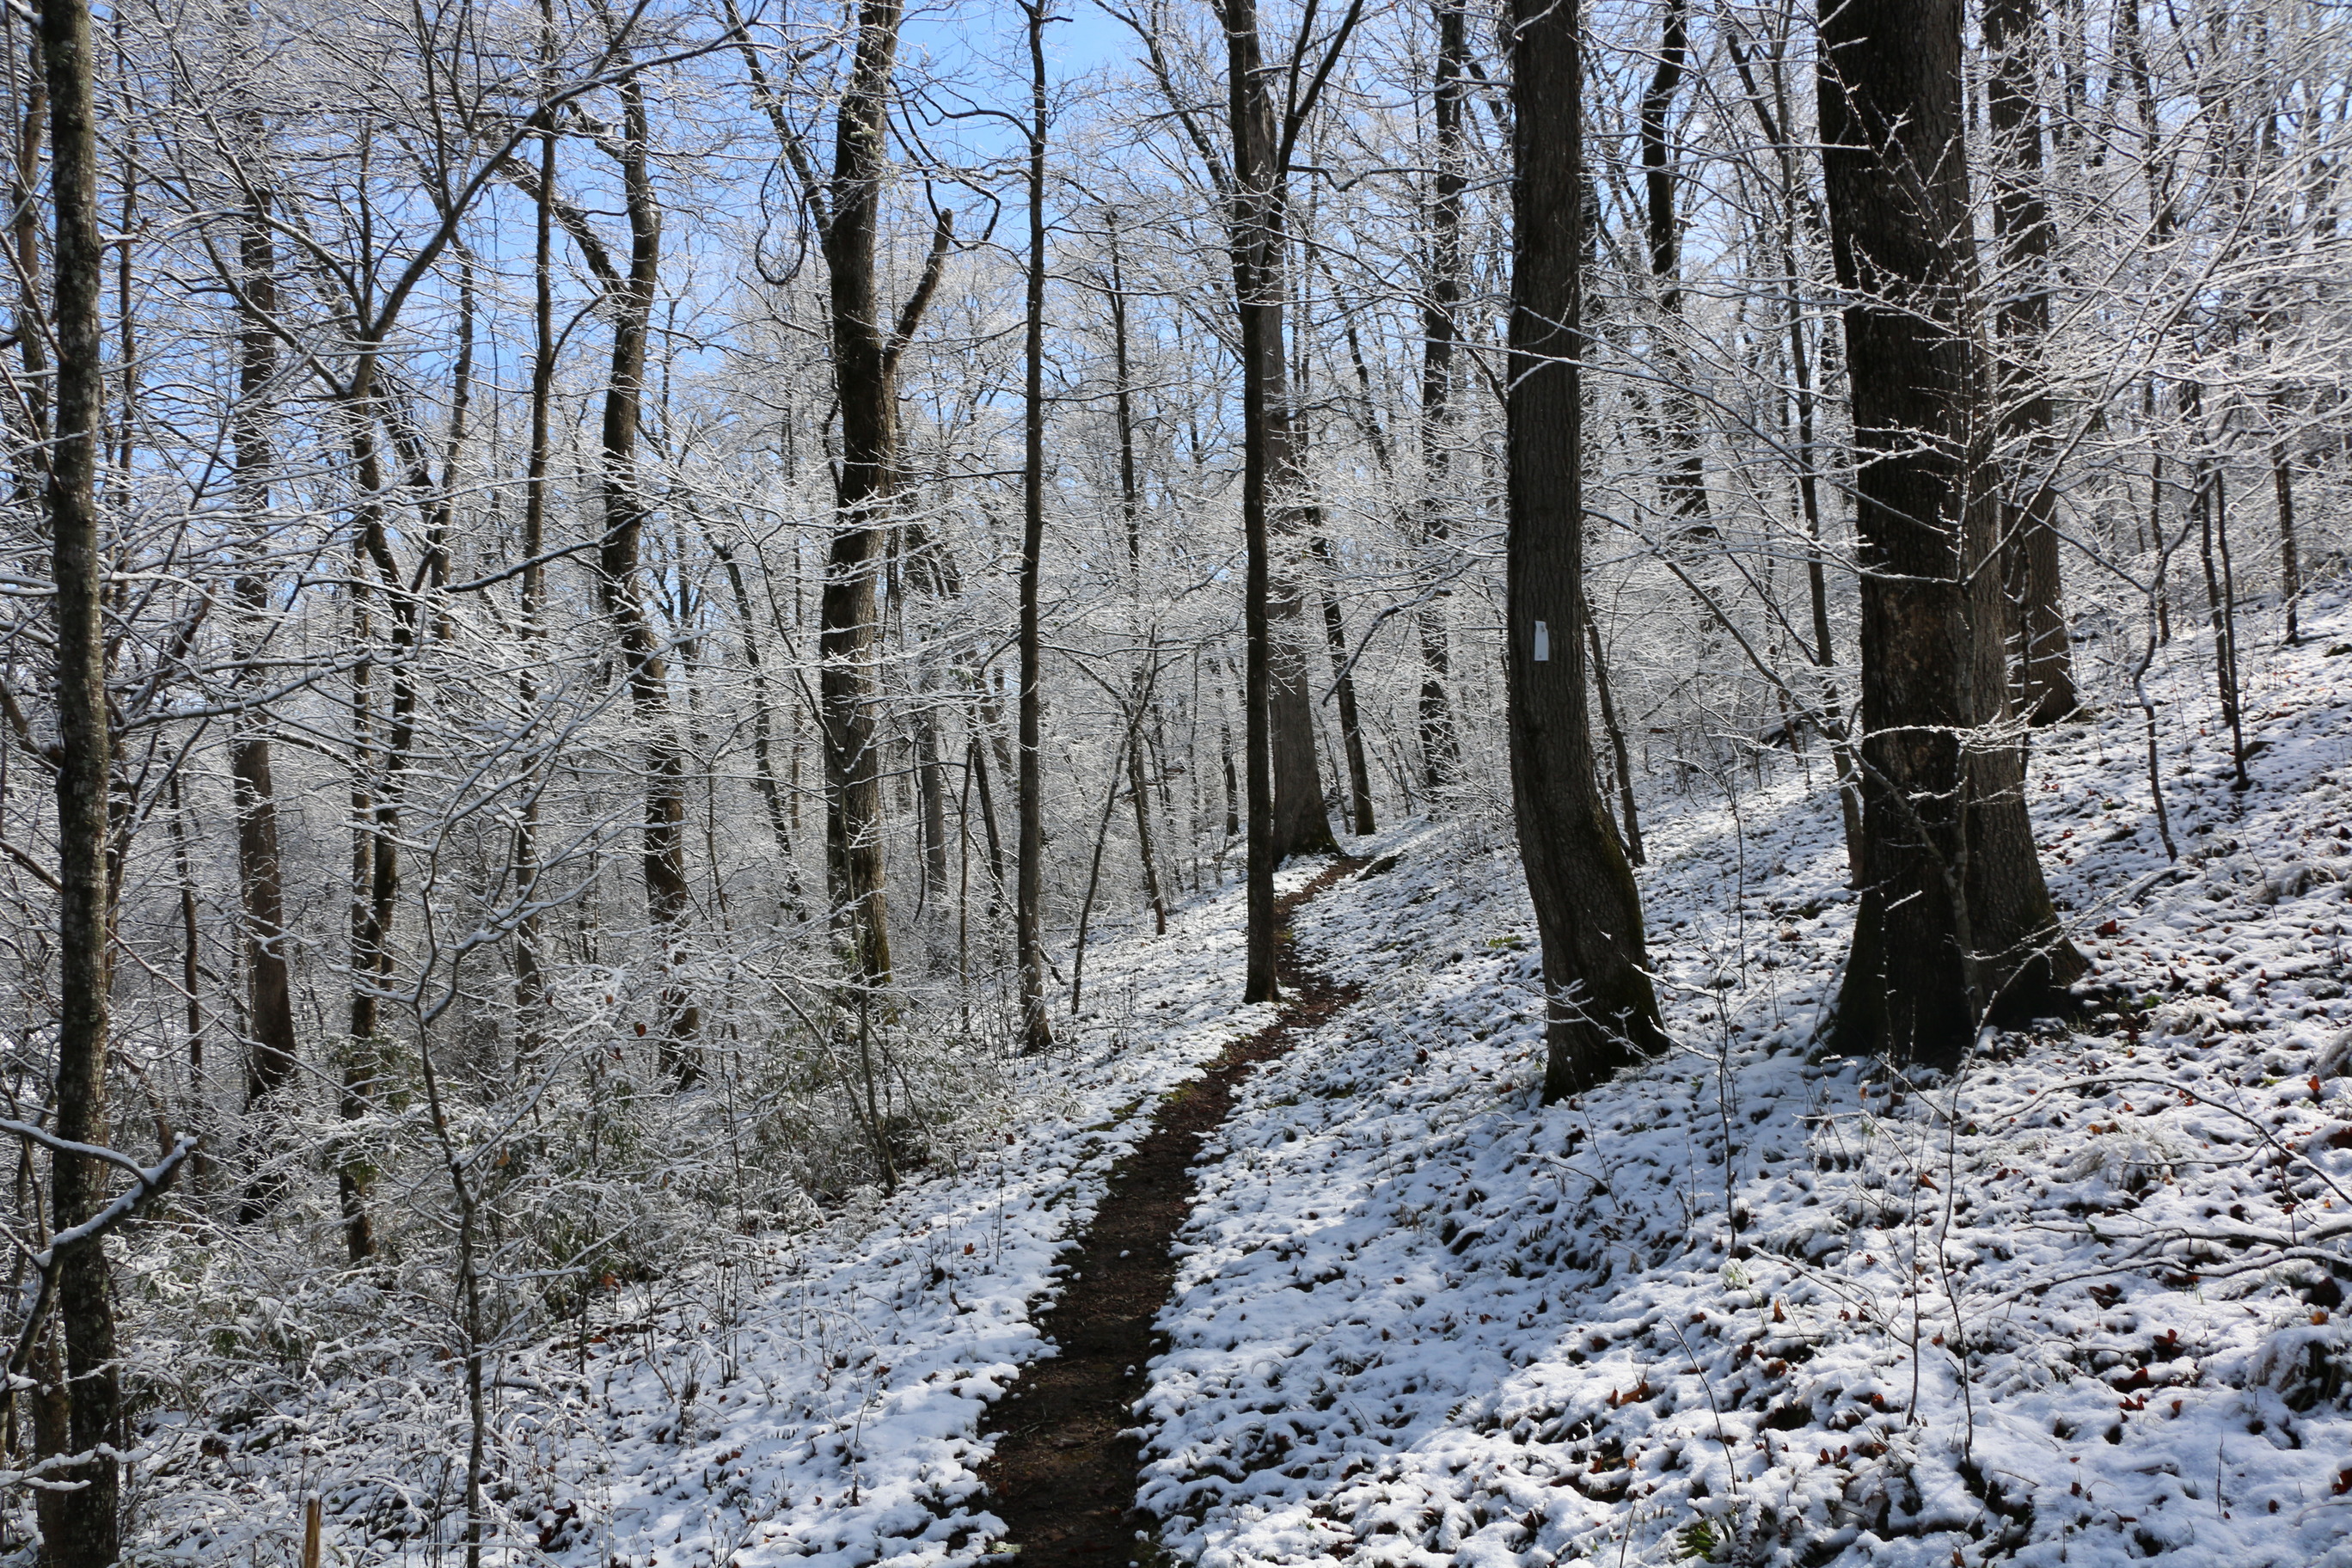 The Buffalo River Trail traverses a snowy forest